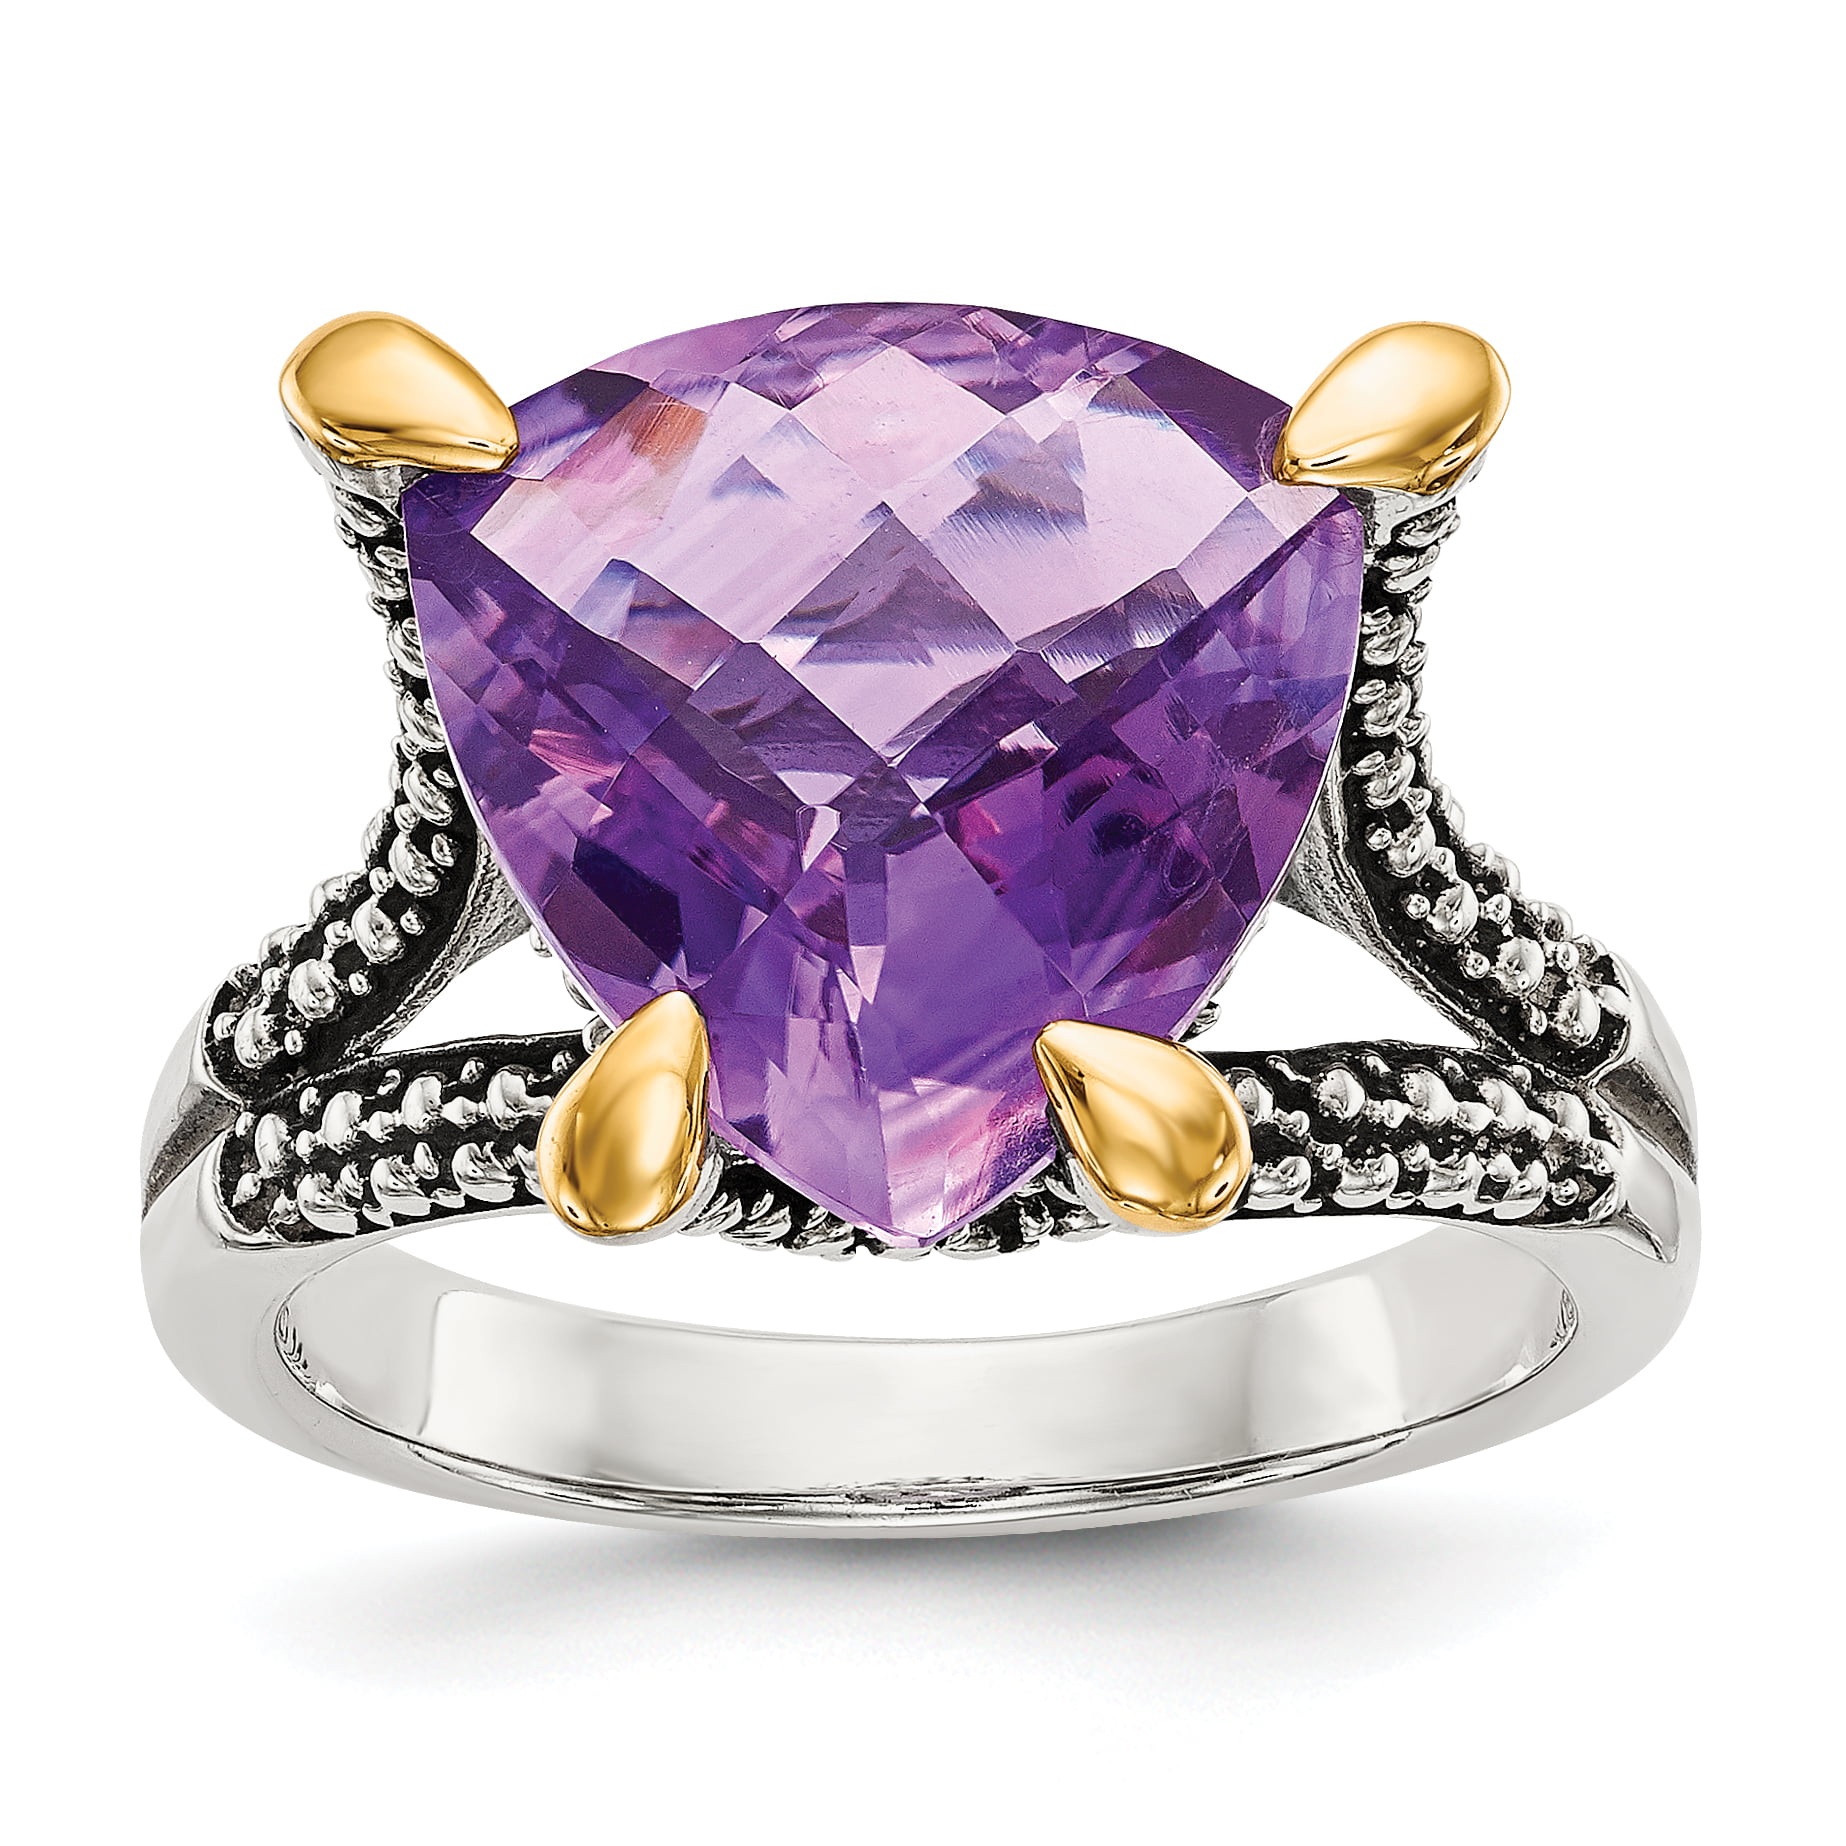 Details about   Shey Couture Sterling Silver Gold-Tone Accent Amethyst Diamond Ring Size 7 